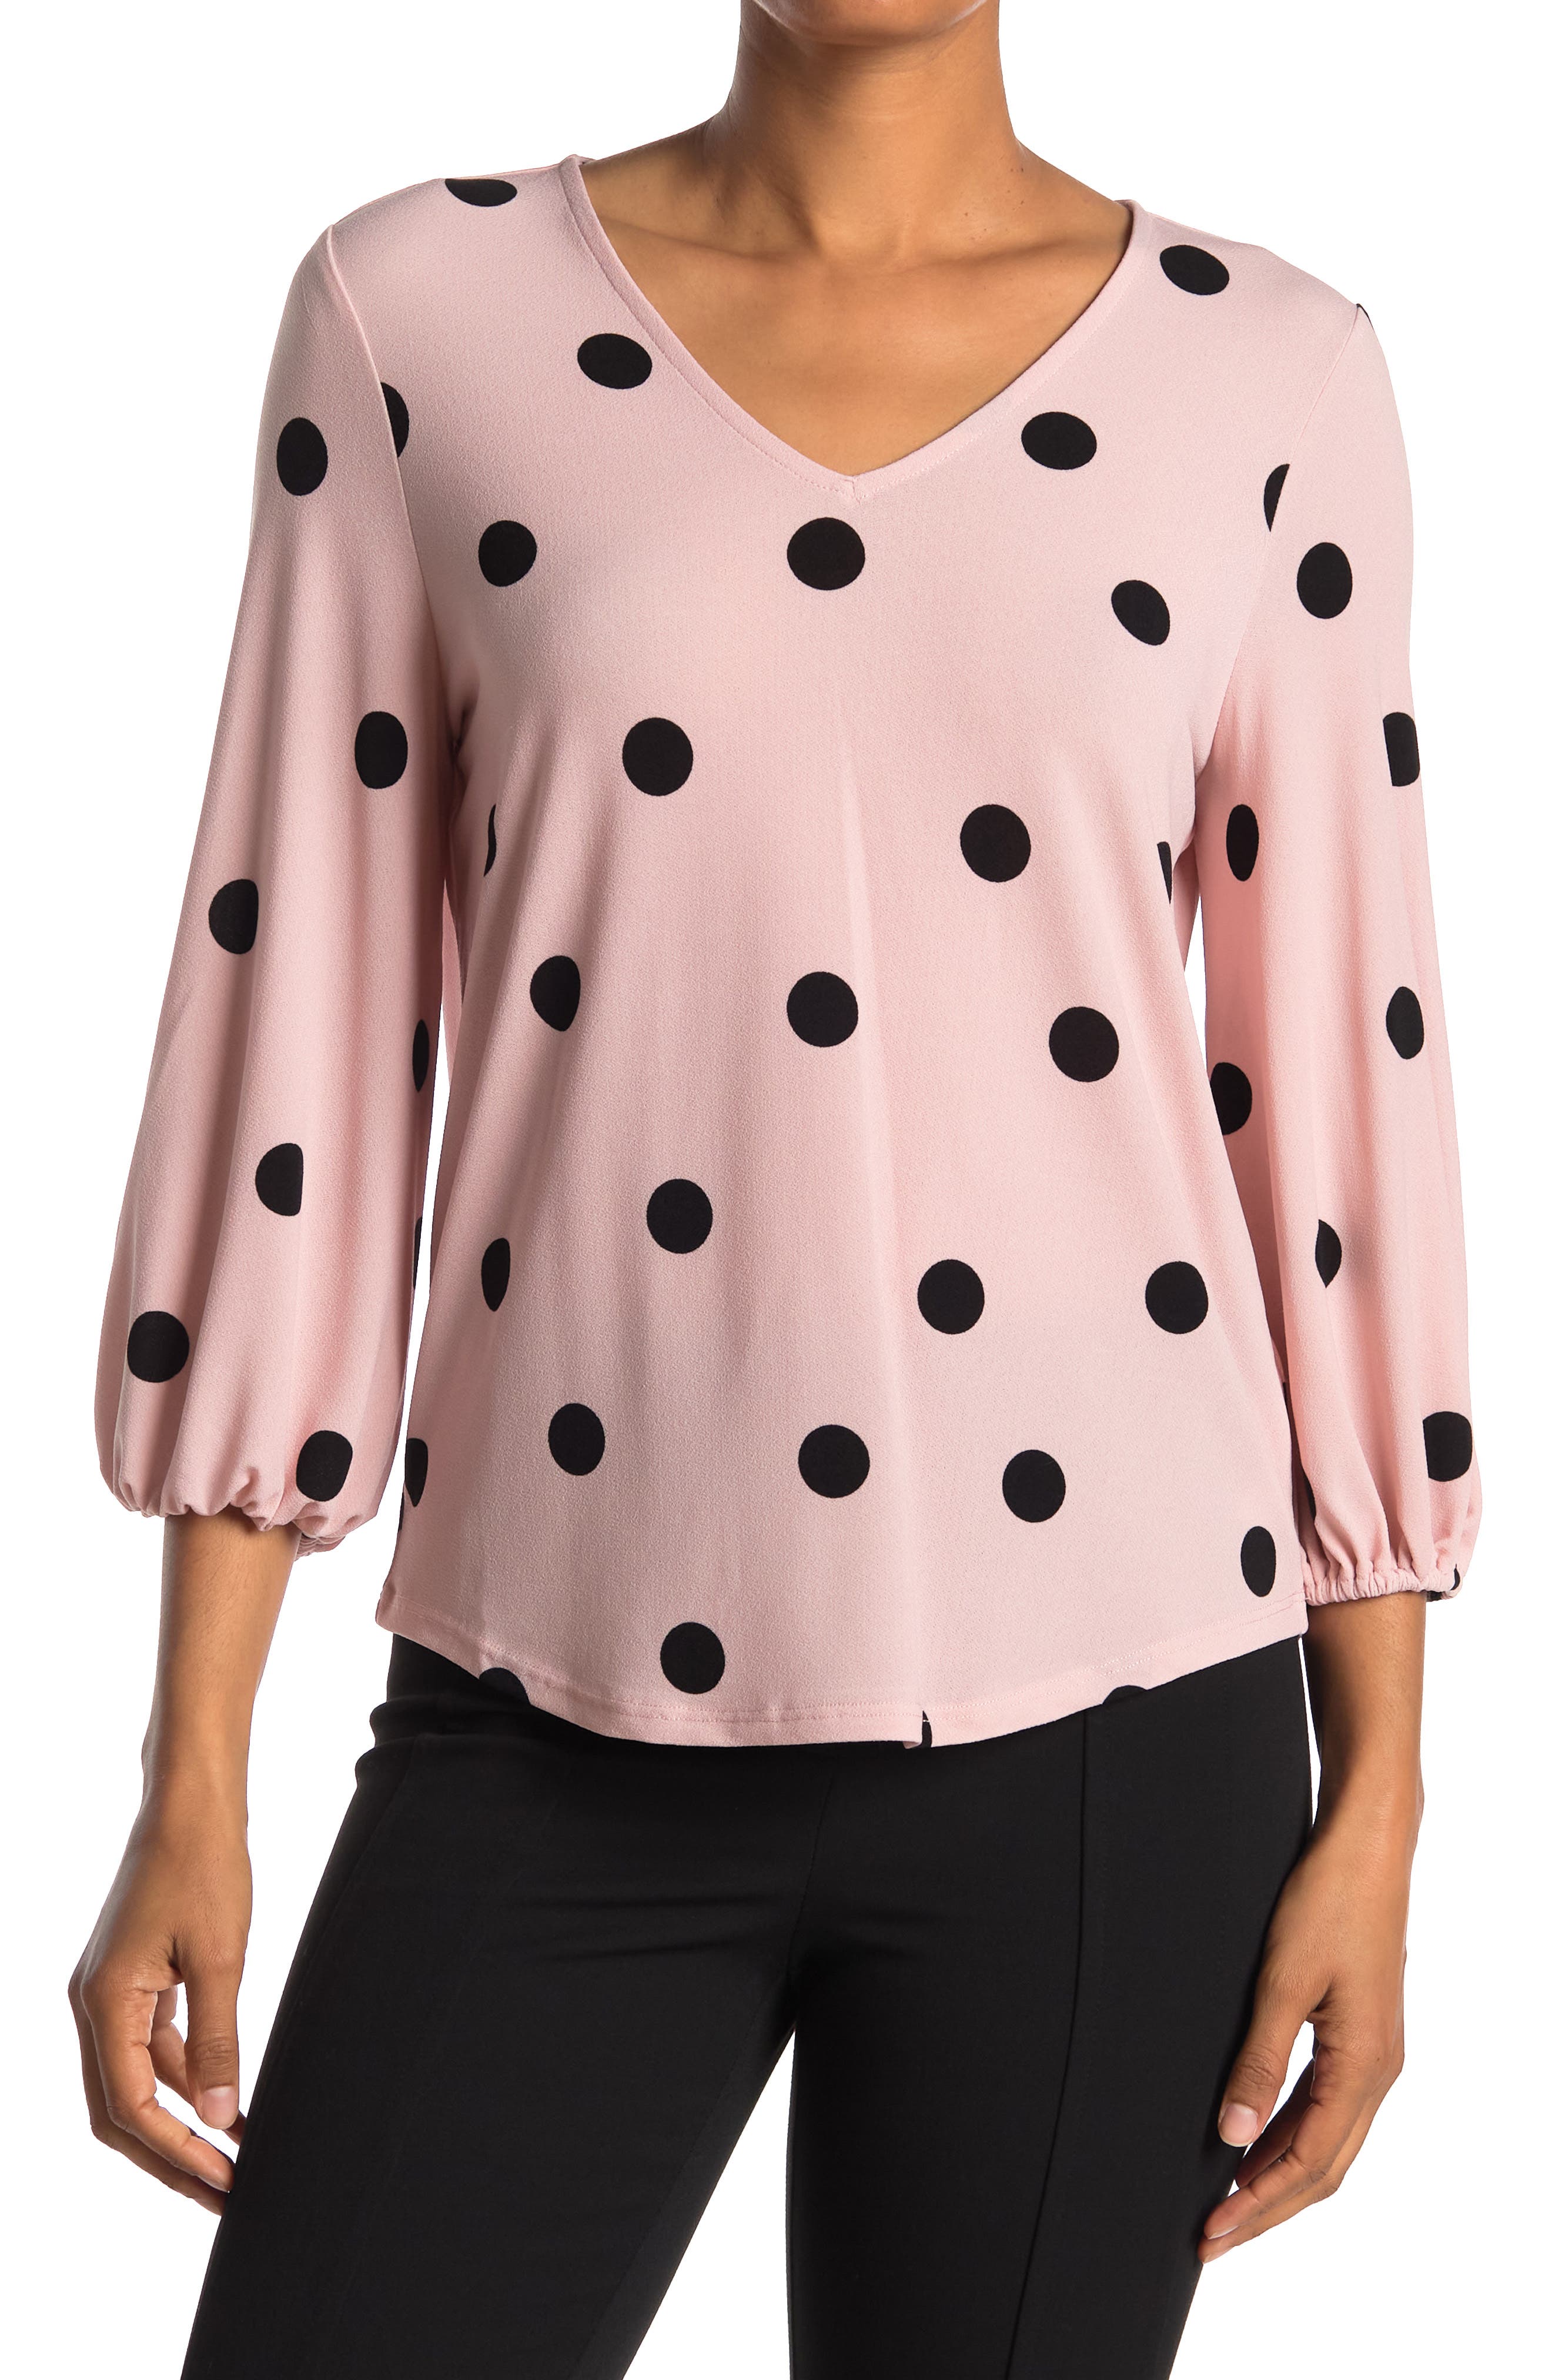 Adrianna Papell Polka Dot Printed Blouse In Open Miscellaneous13